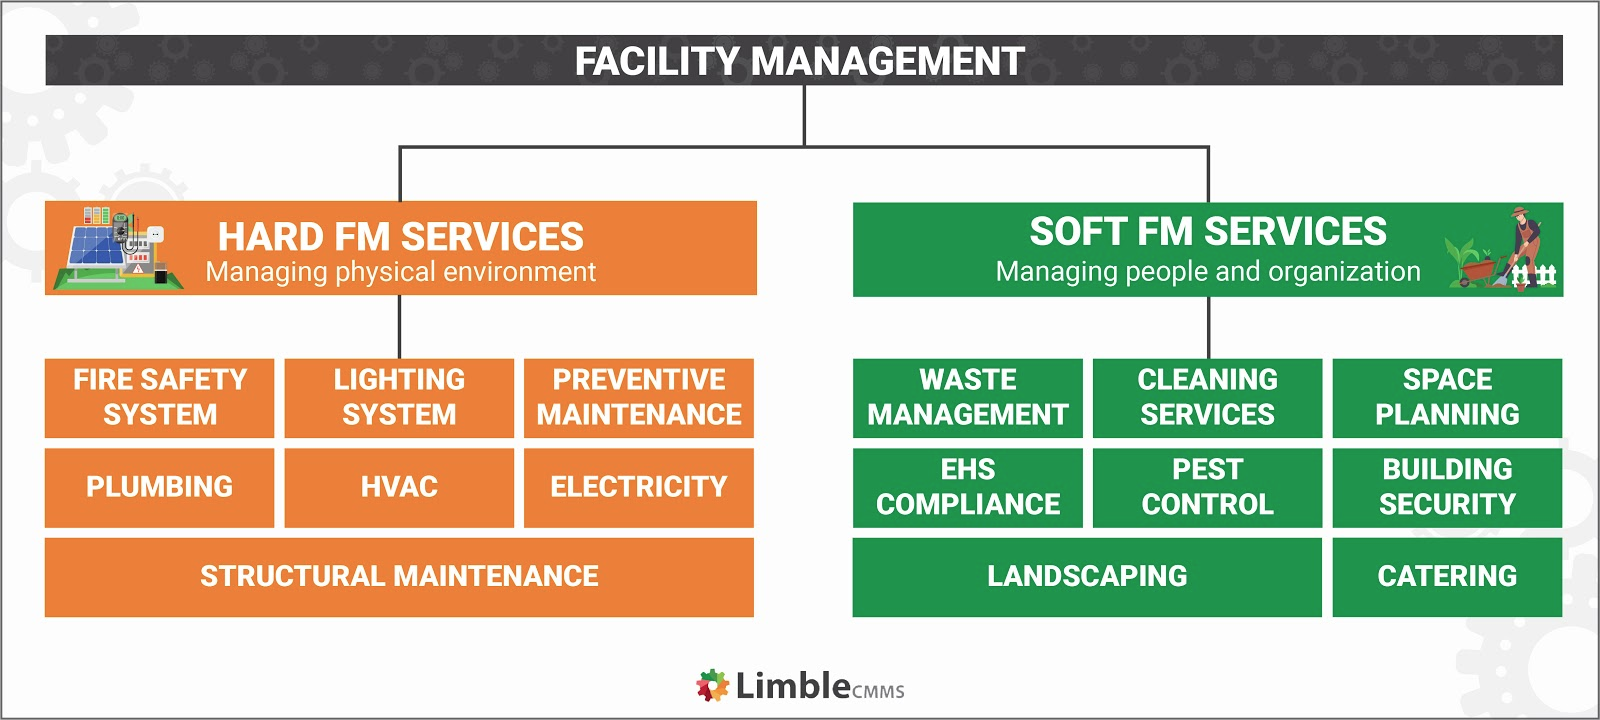 The role of maintenance in facility management